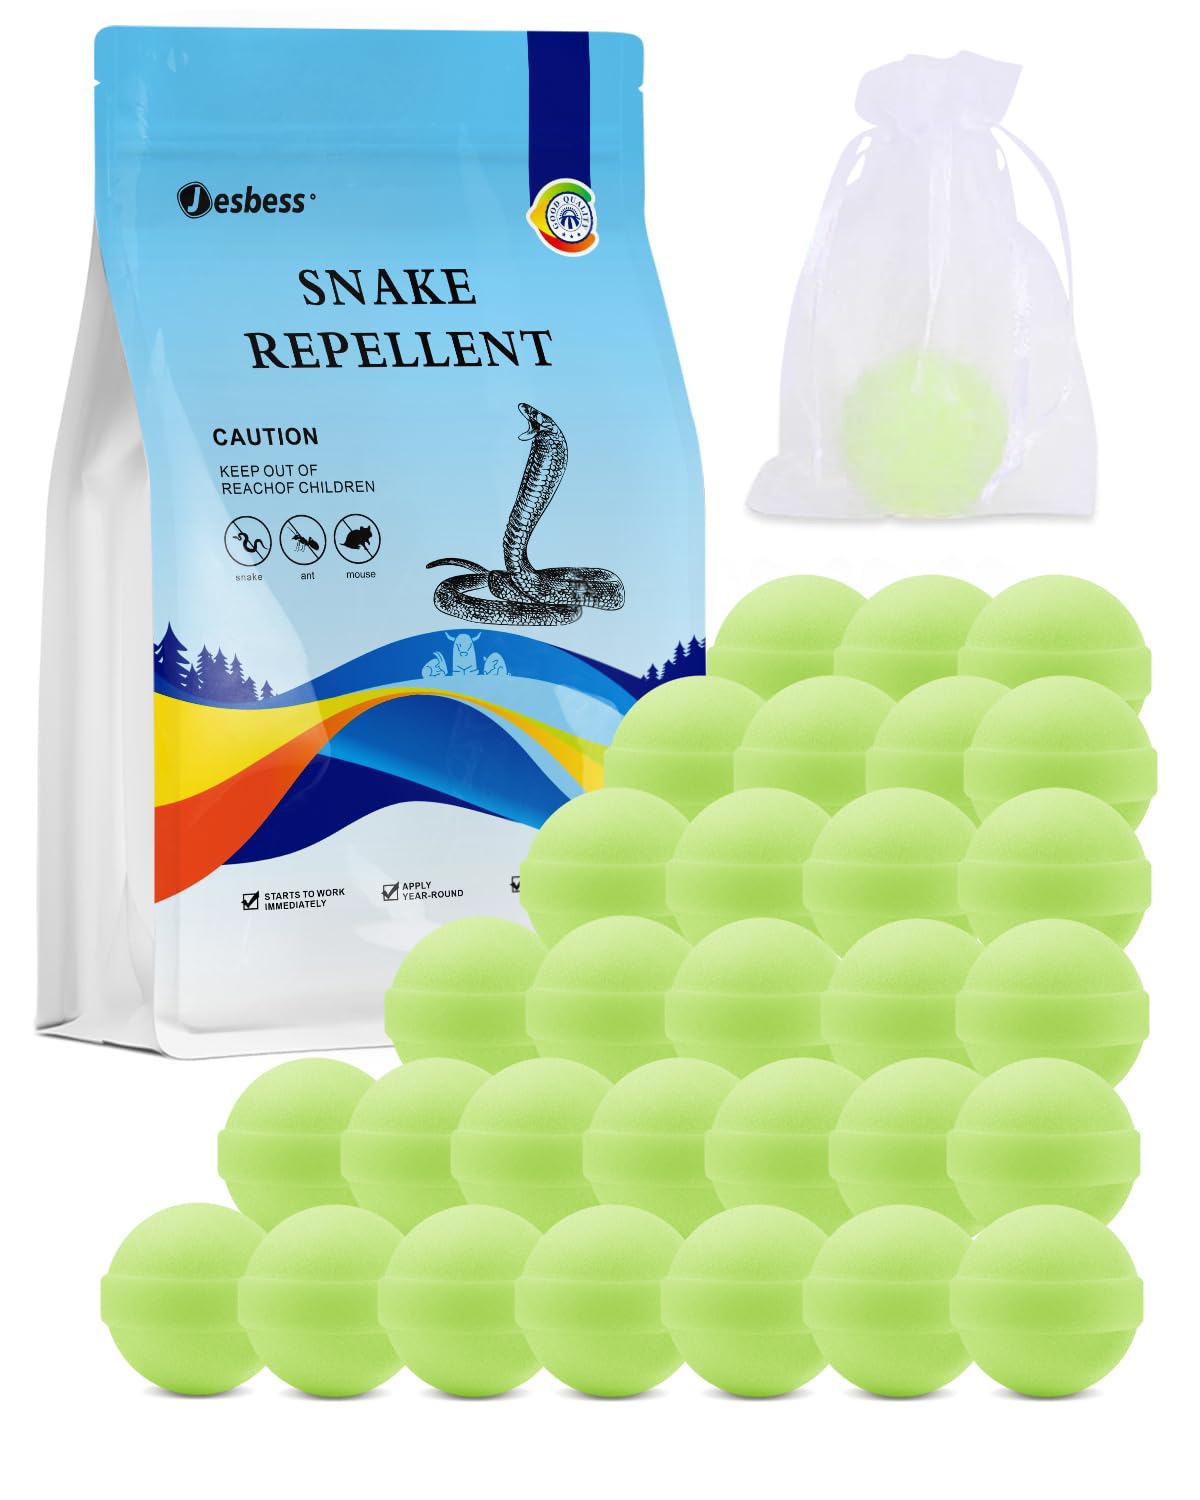 Jesbess Snake Repellent (35 Pack)- Keep Snake Away from Yard/Outdoor powerfully, Plant-Based Snake repellents are Safe for People and Pets, Snake Gone from Lawn Garden Camping Fishing Home